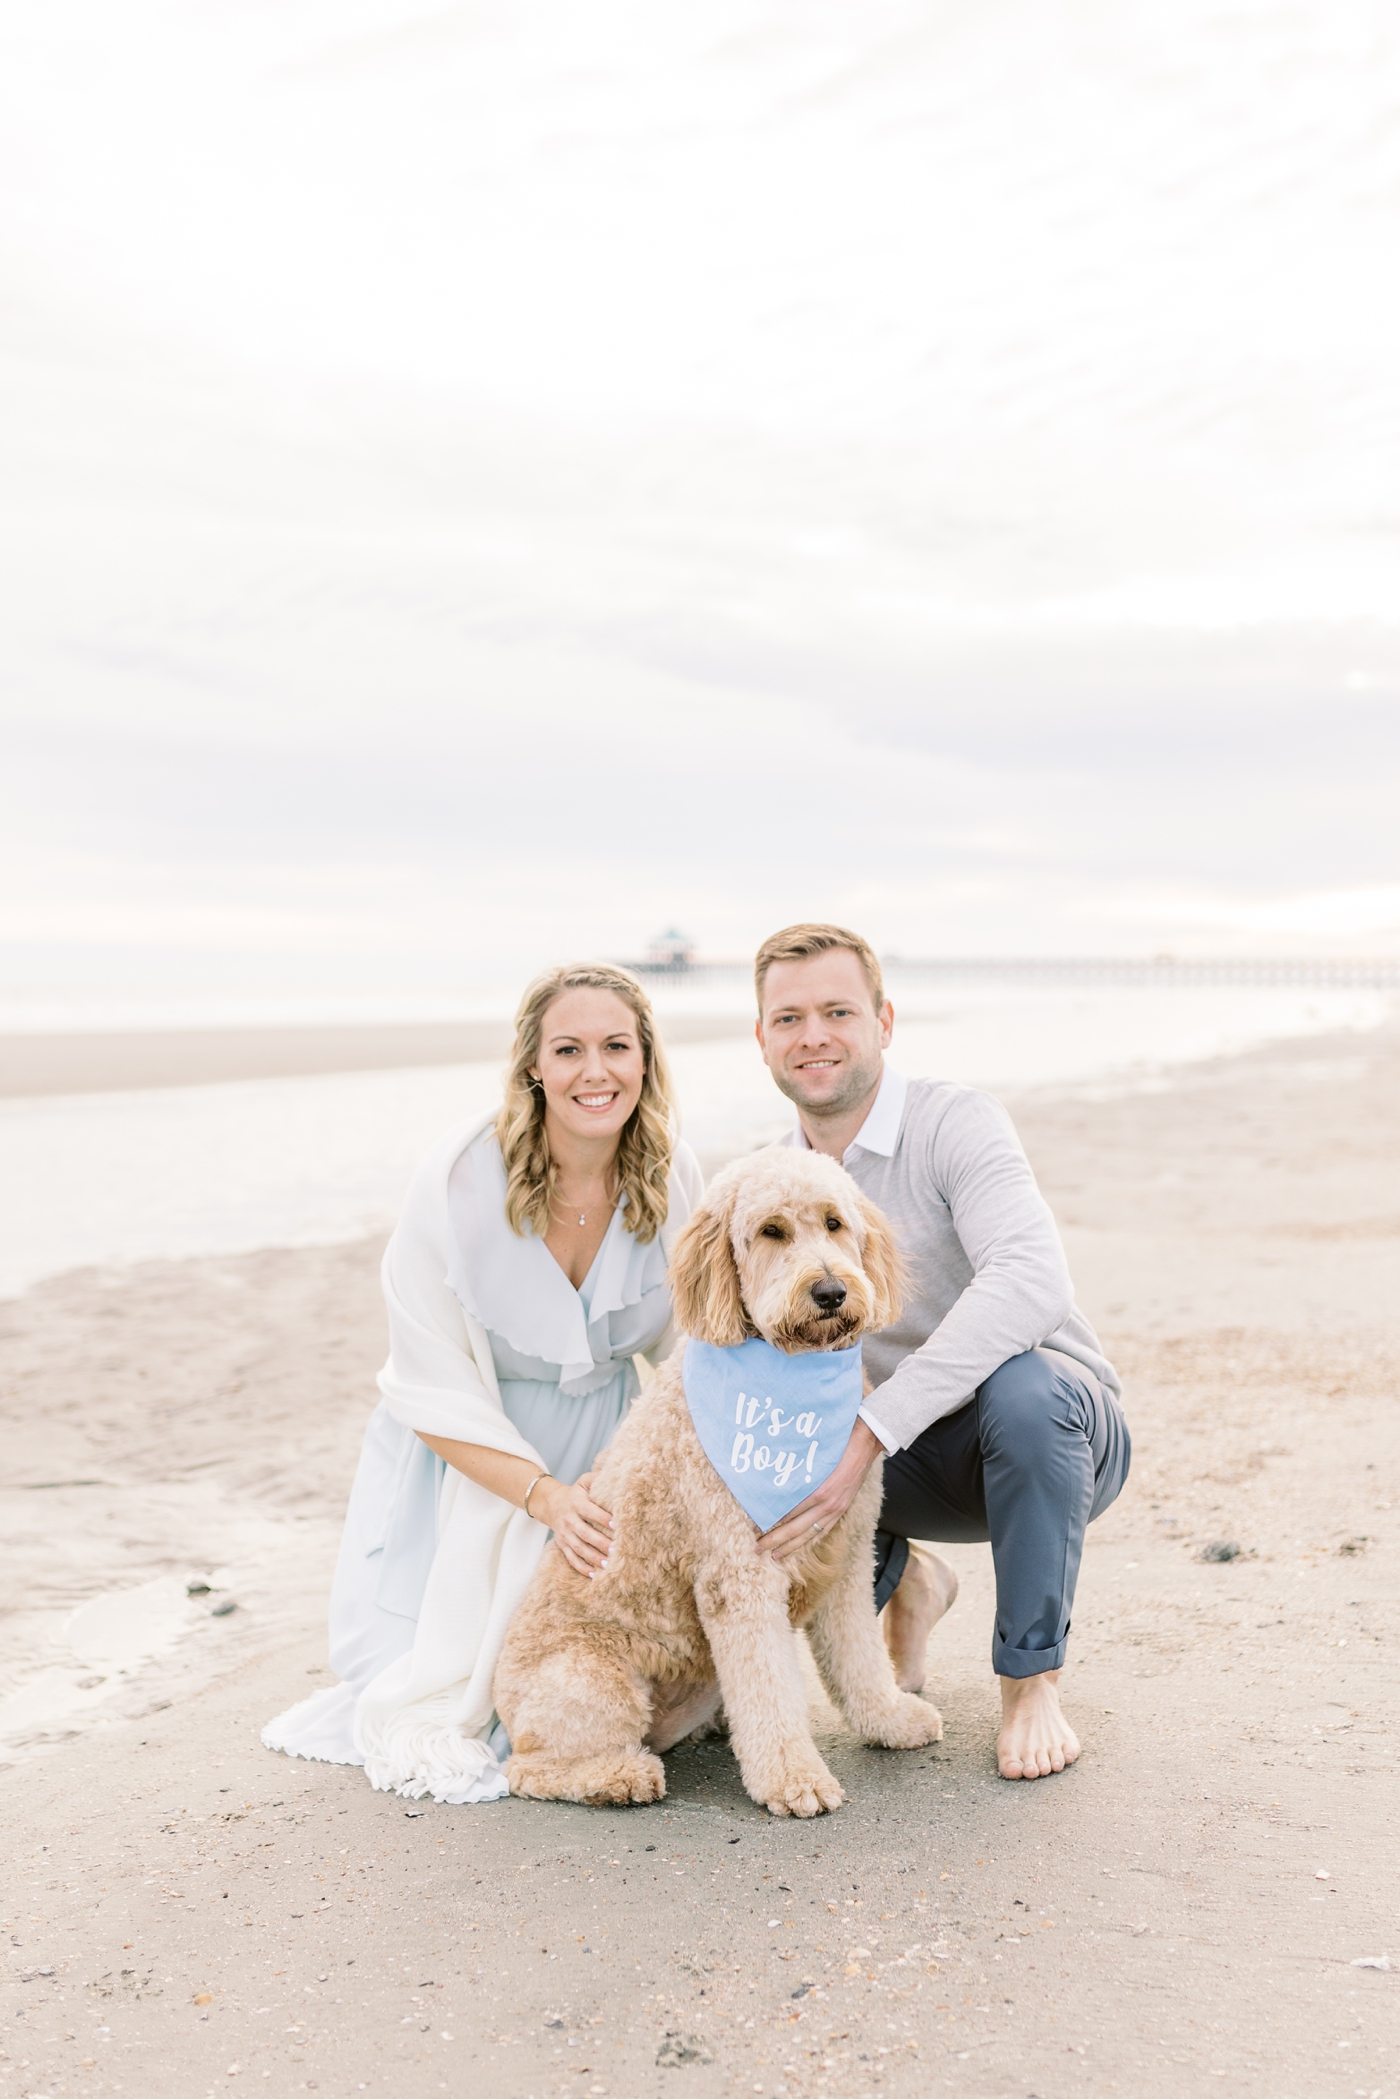 Gender reveal with dog on the beach. Photo by Caitlyn Motycka Photography.